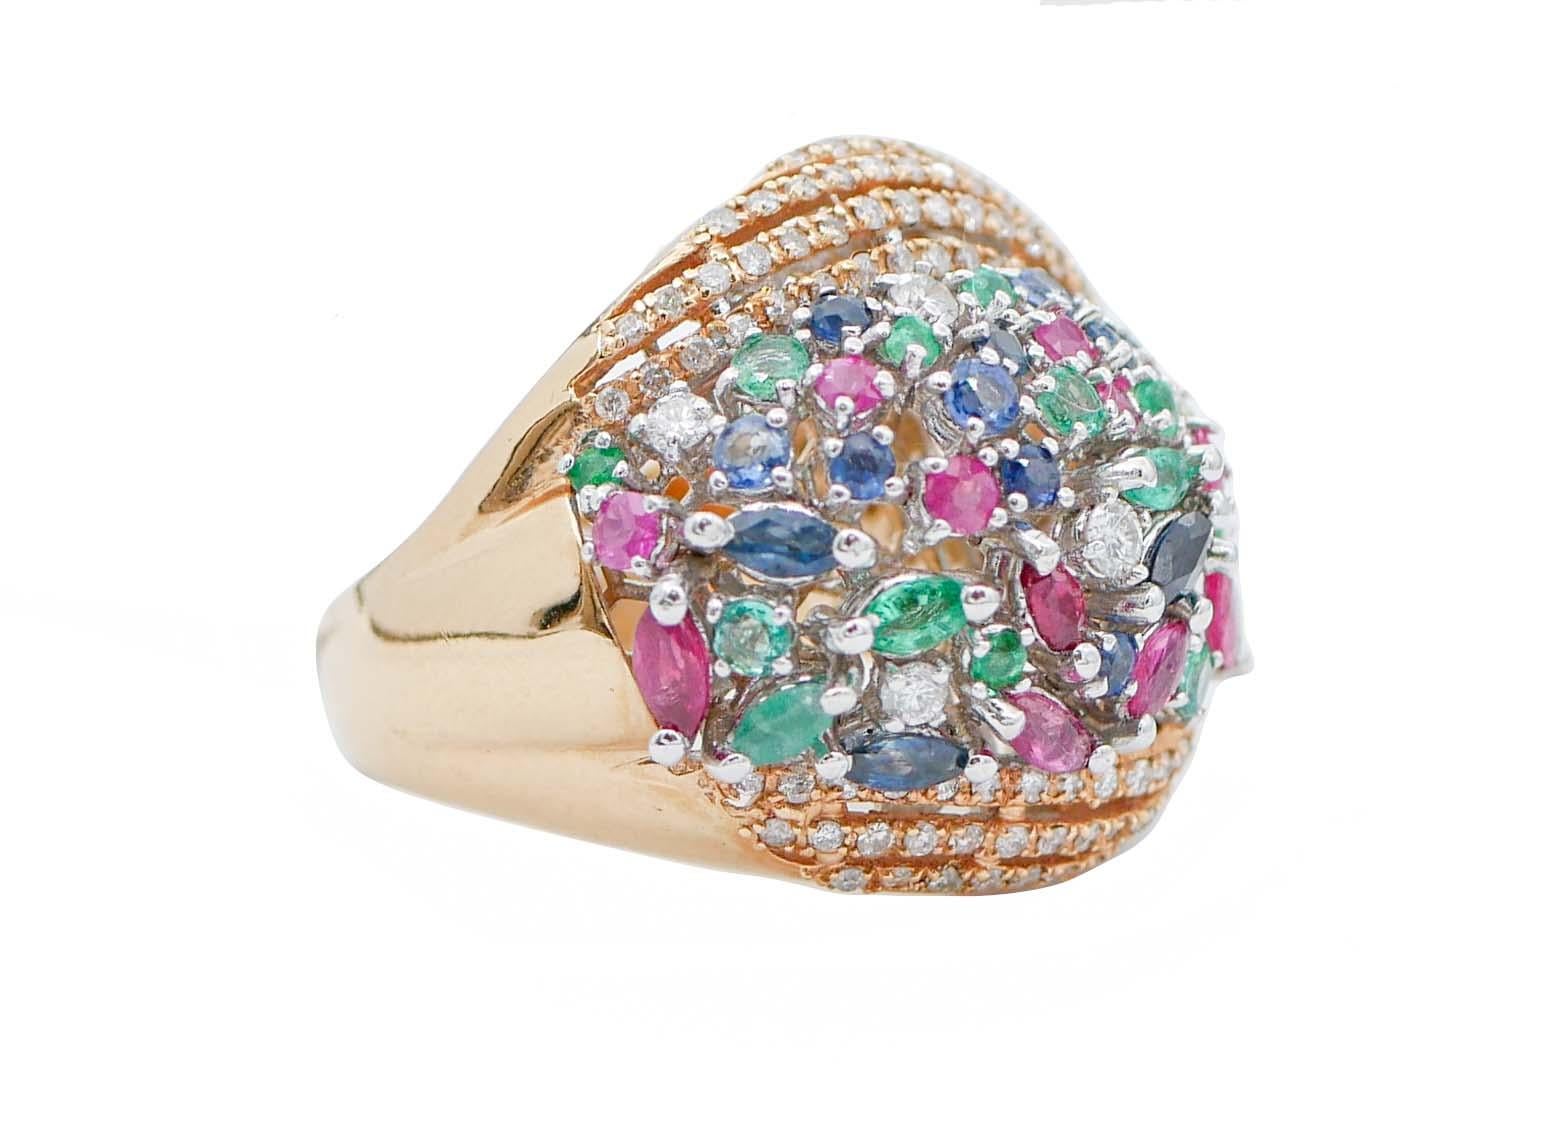 Retro Emeralds, Rubies, Sapphires, Diamonds, 18 Karat Rose and White Gold Ring For Sale